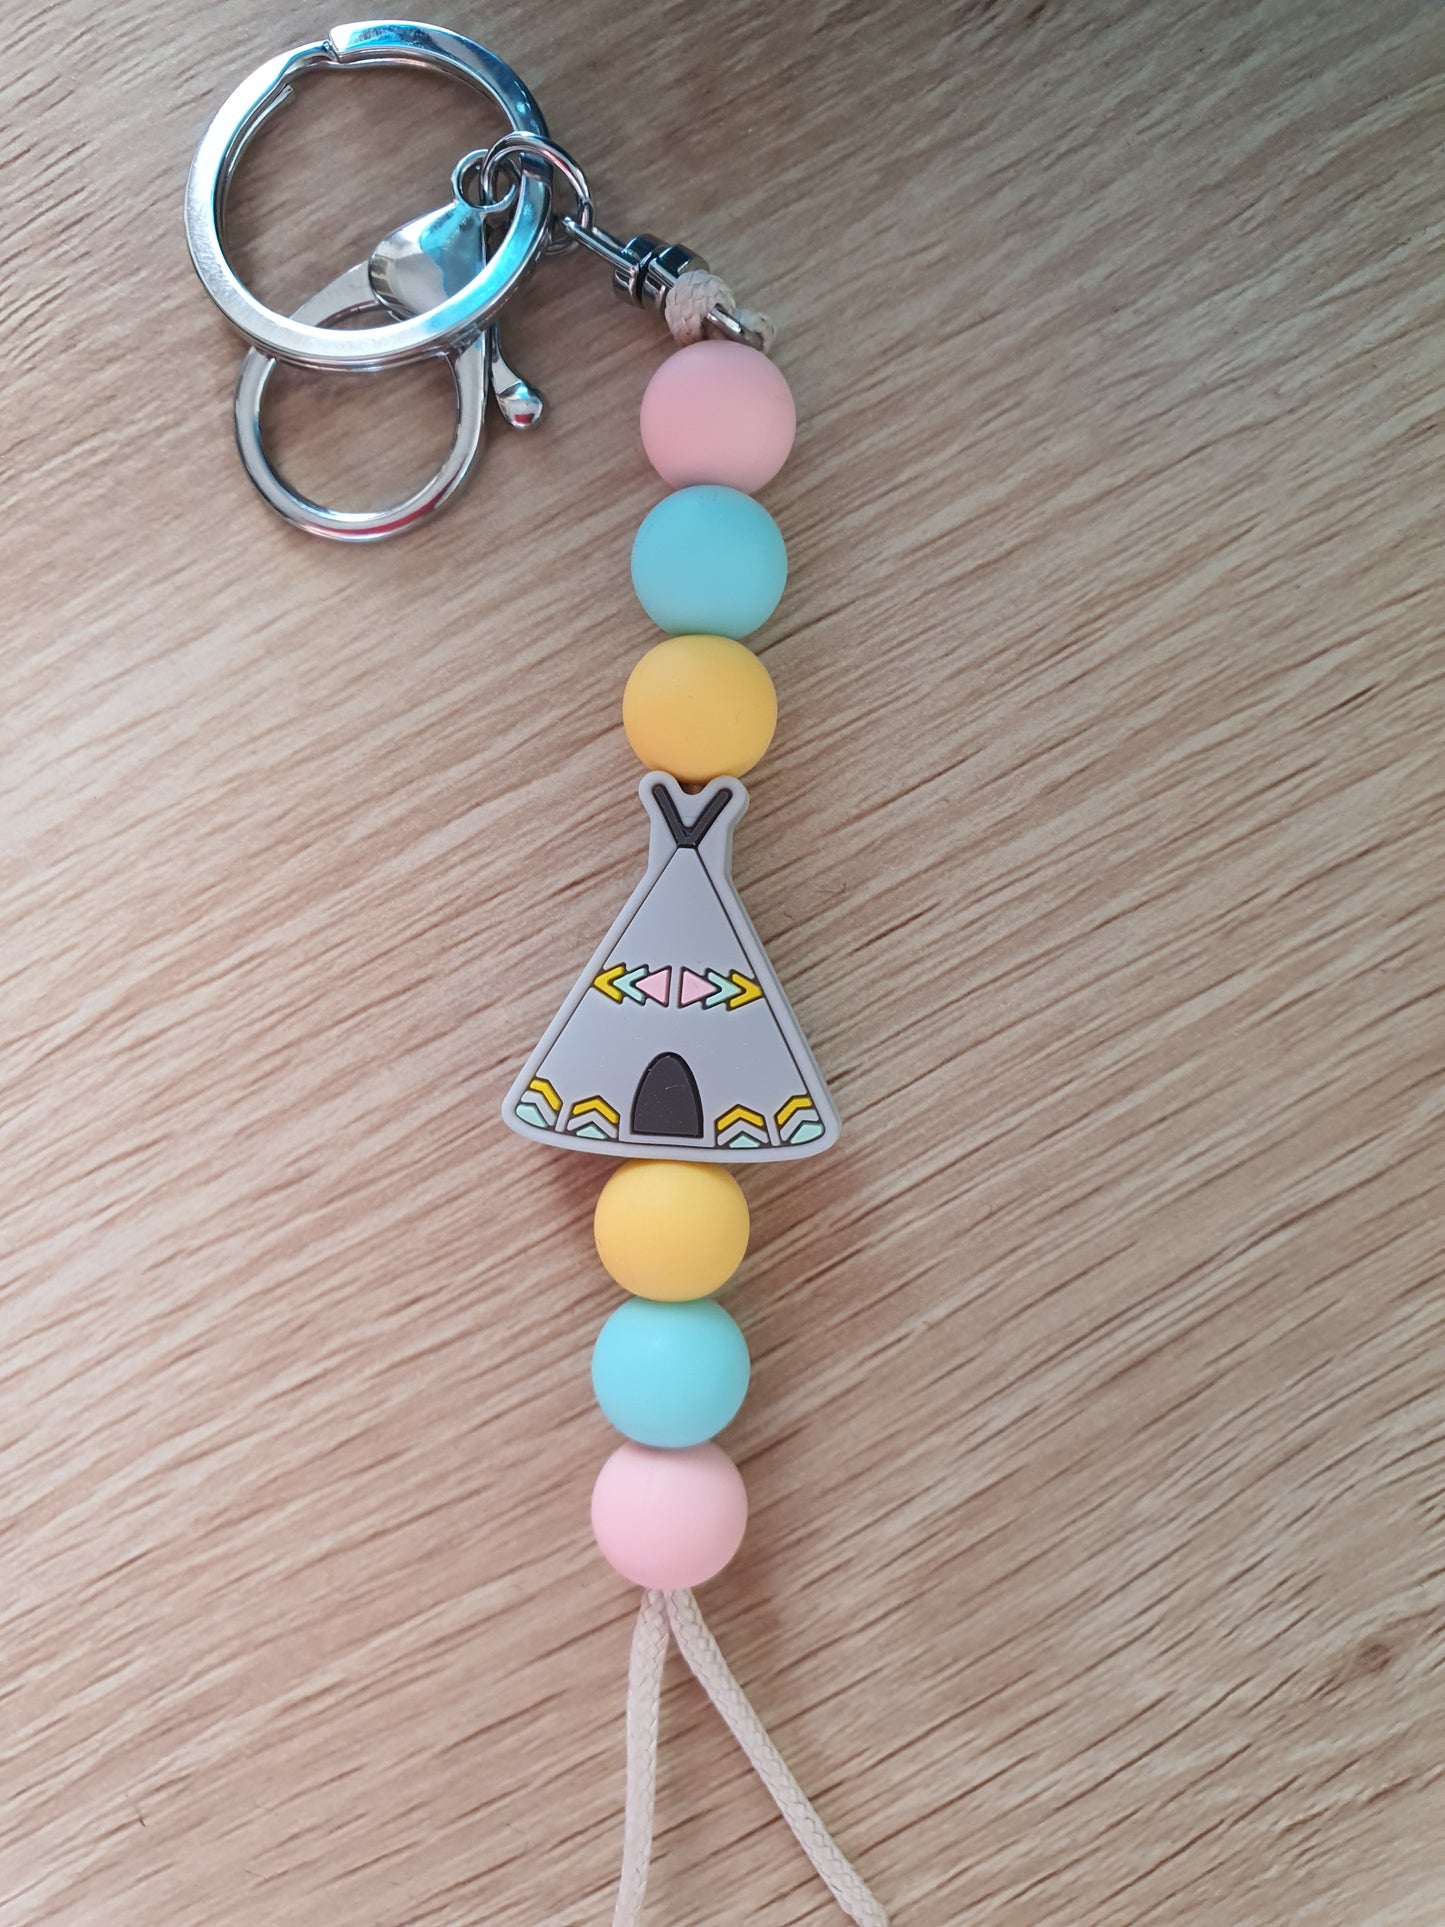 Tipi Tent / Teepee Tent / Indian Tent Silicone Bead | Handmade Keyring or Lanyard